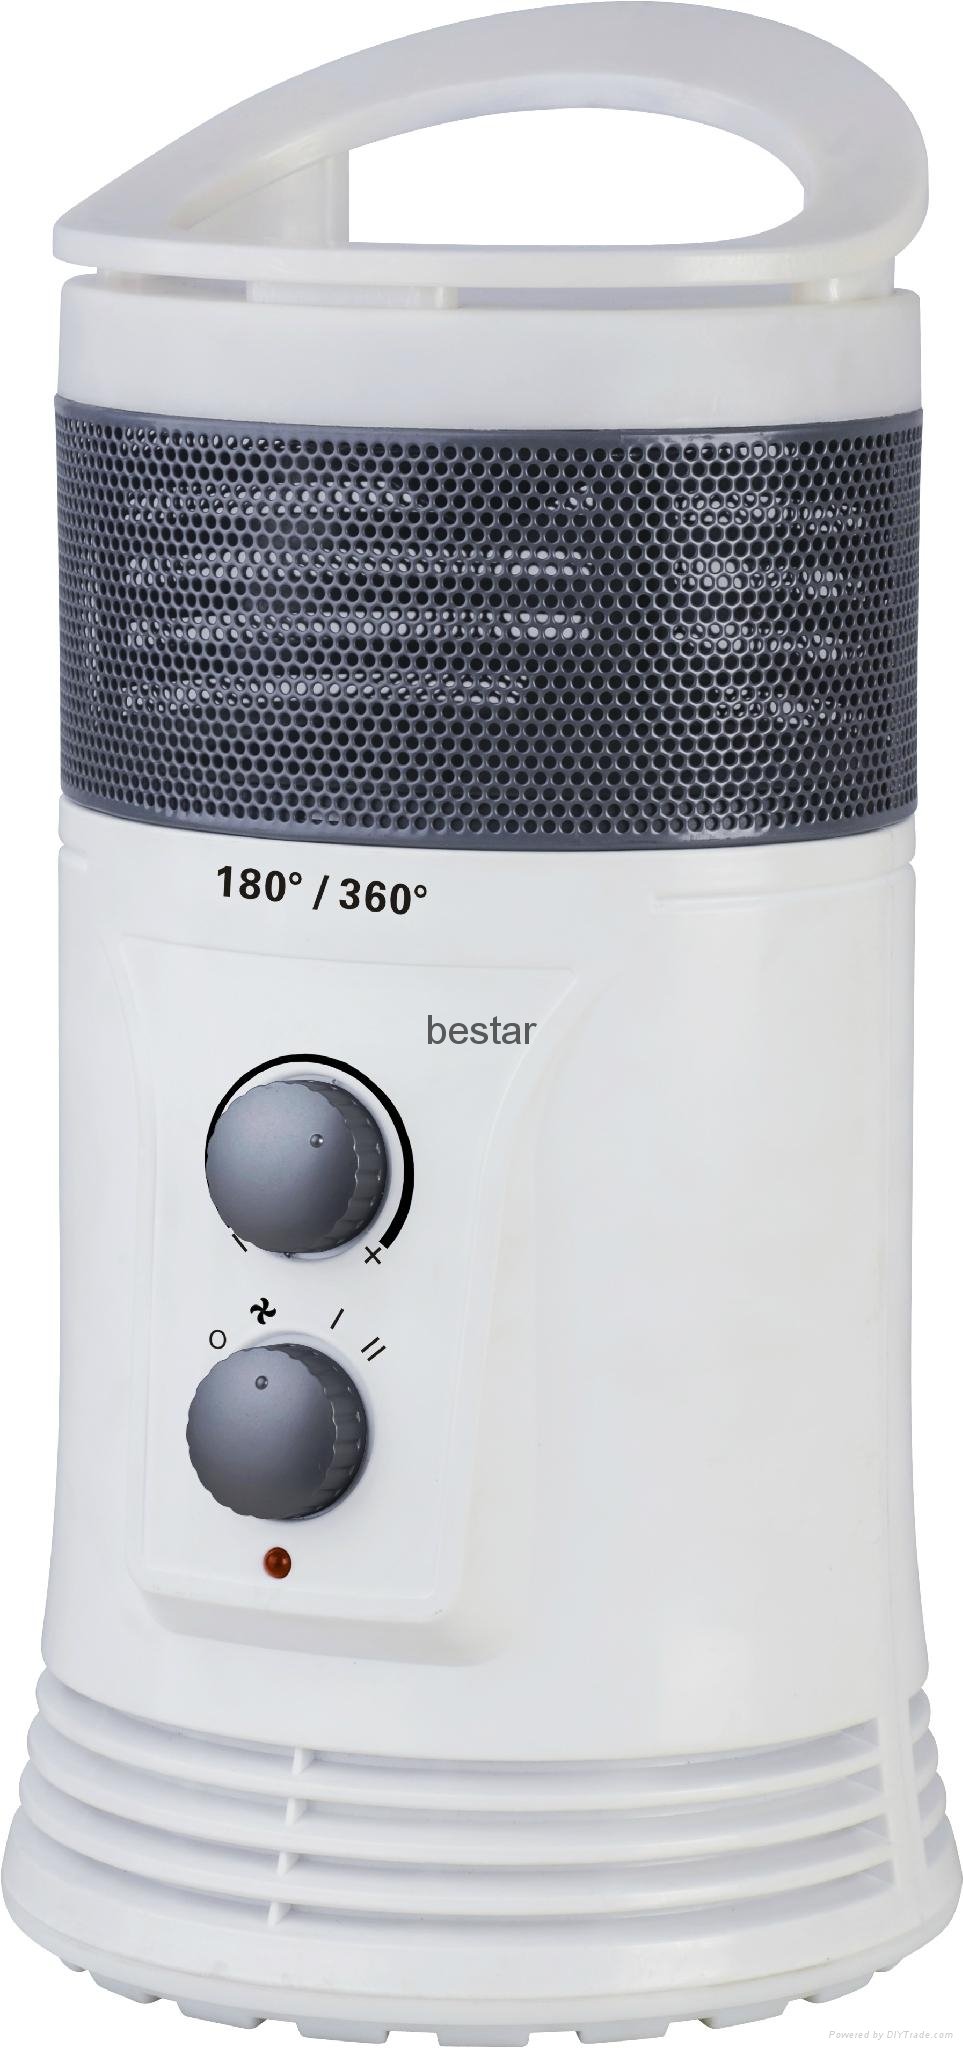 Tower Portable Space Heater, Black